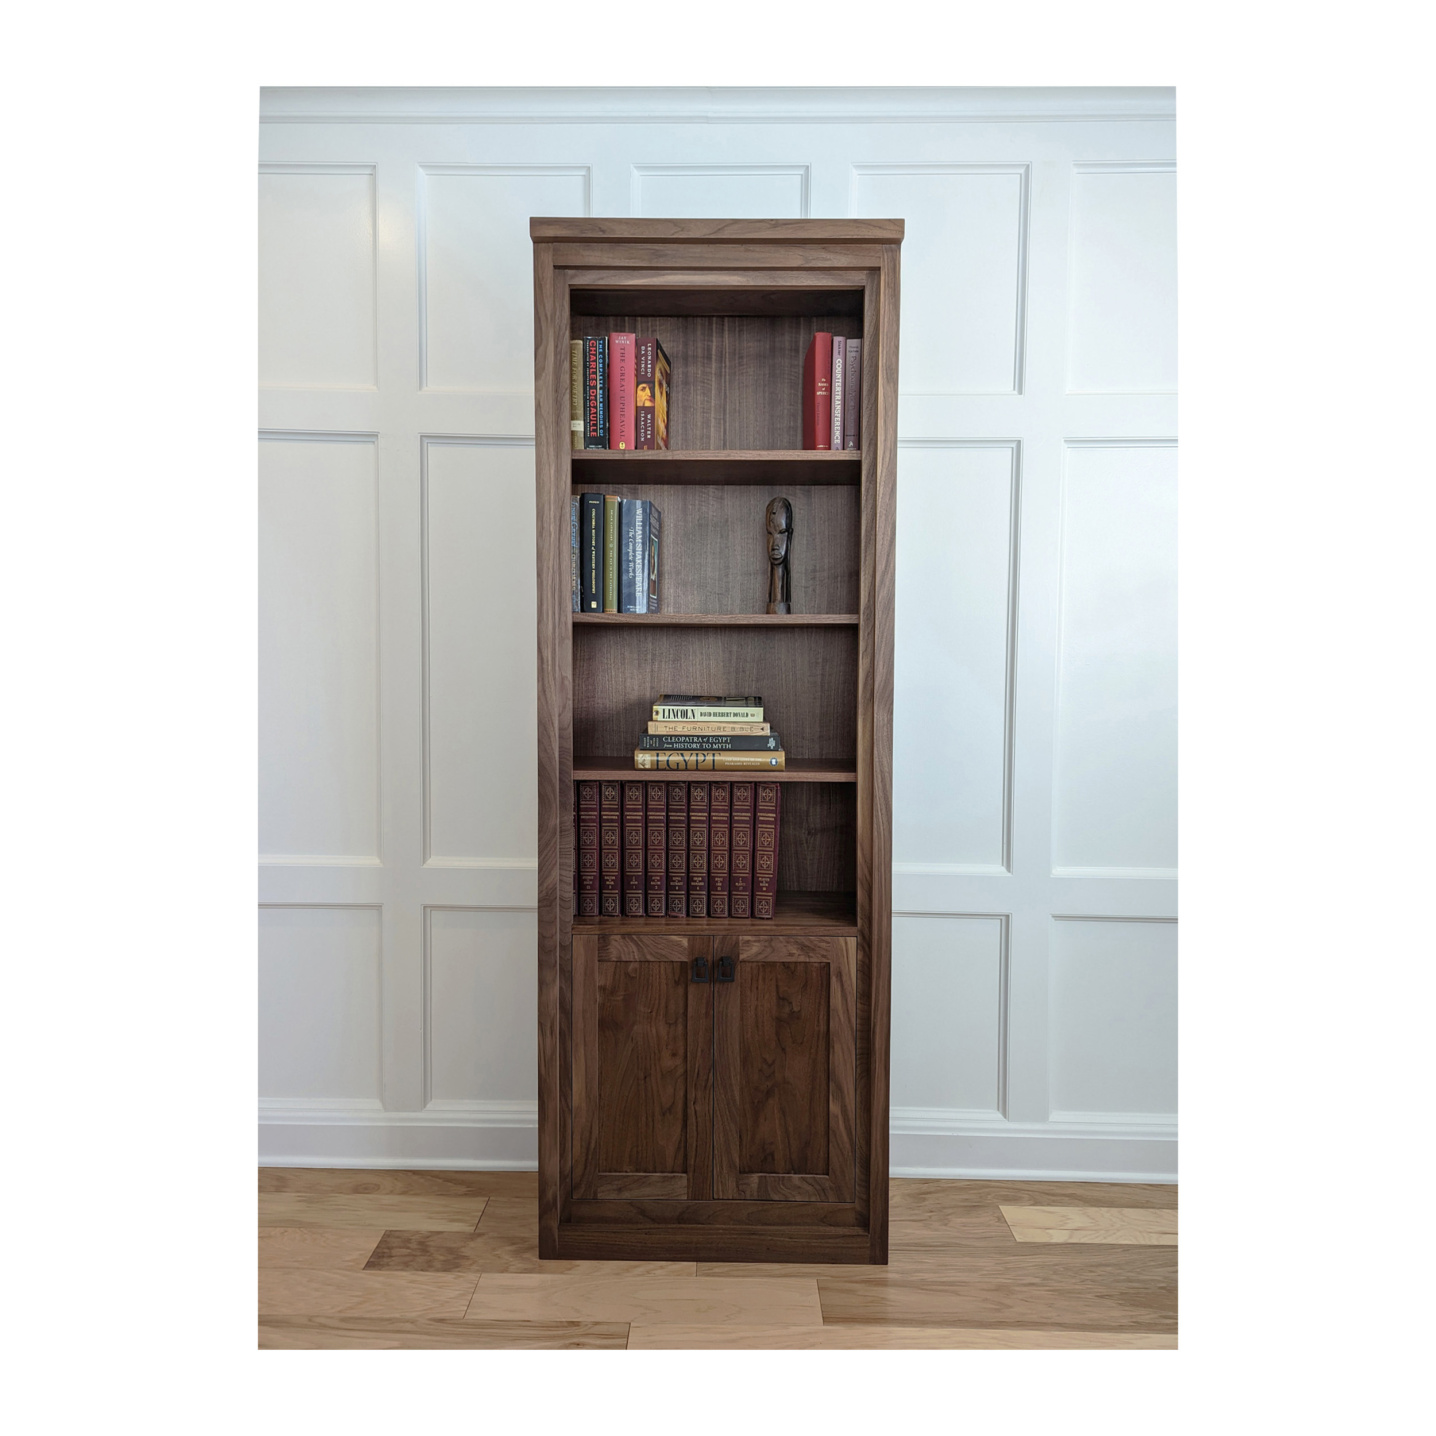 Walnut modern bookcase with doors constructed in solid woods--Made by 57NorthPlank Tailored Modern Furniture